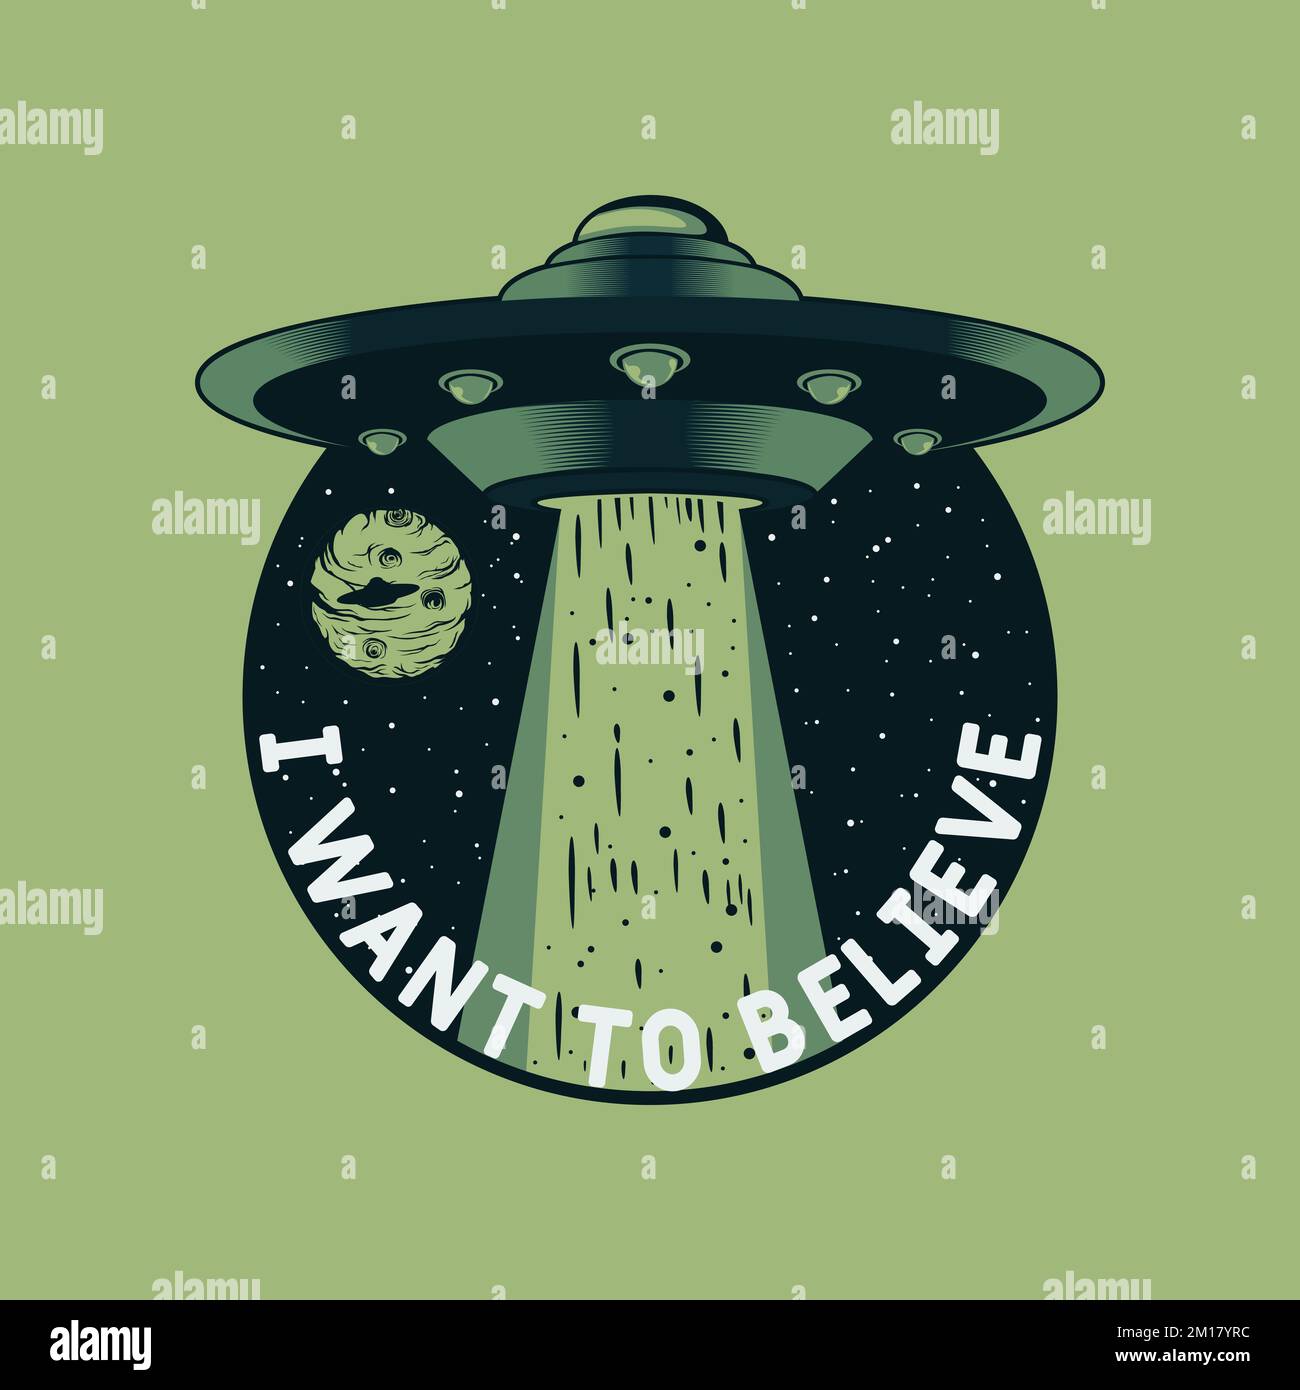 I Want To Believe, Alien and UFO Typography Quote Design. Stock Vector